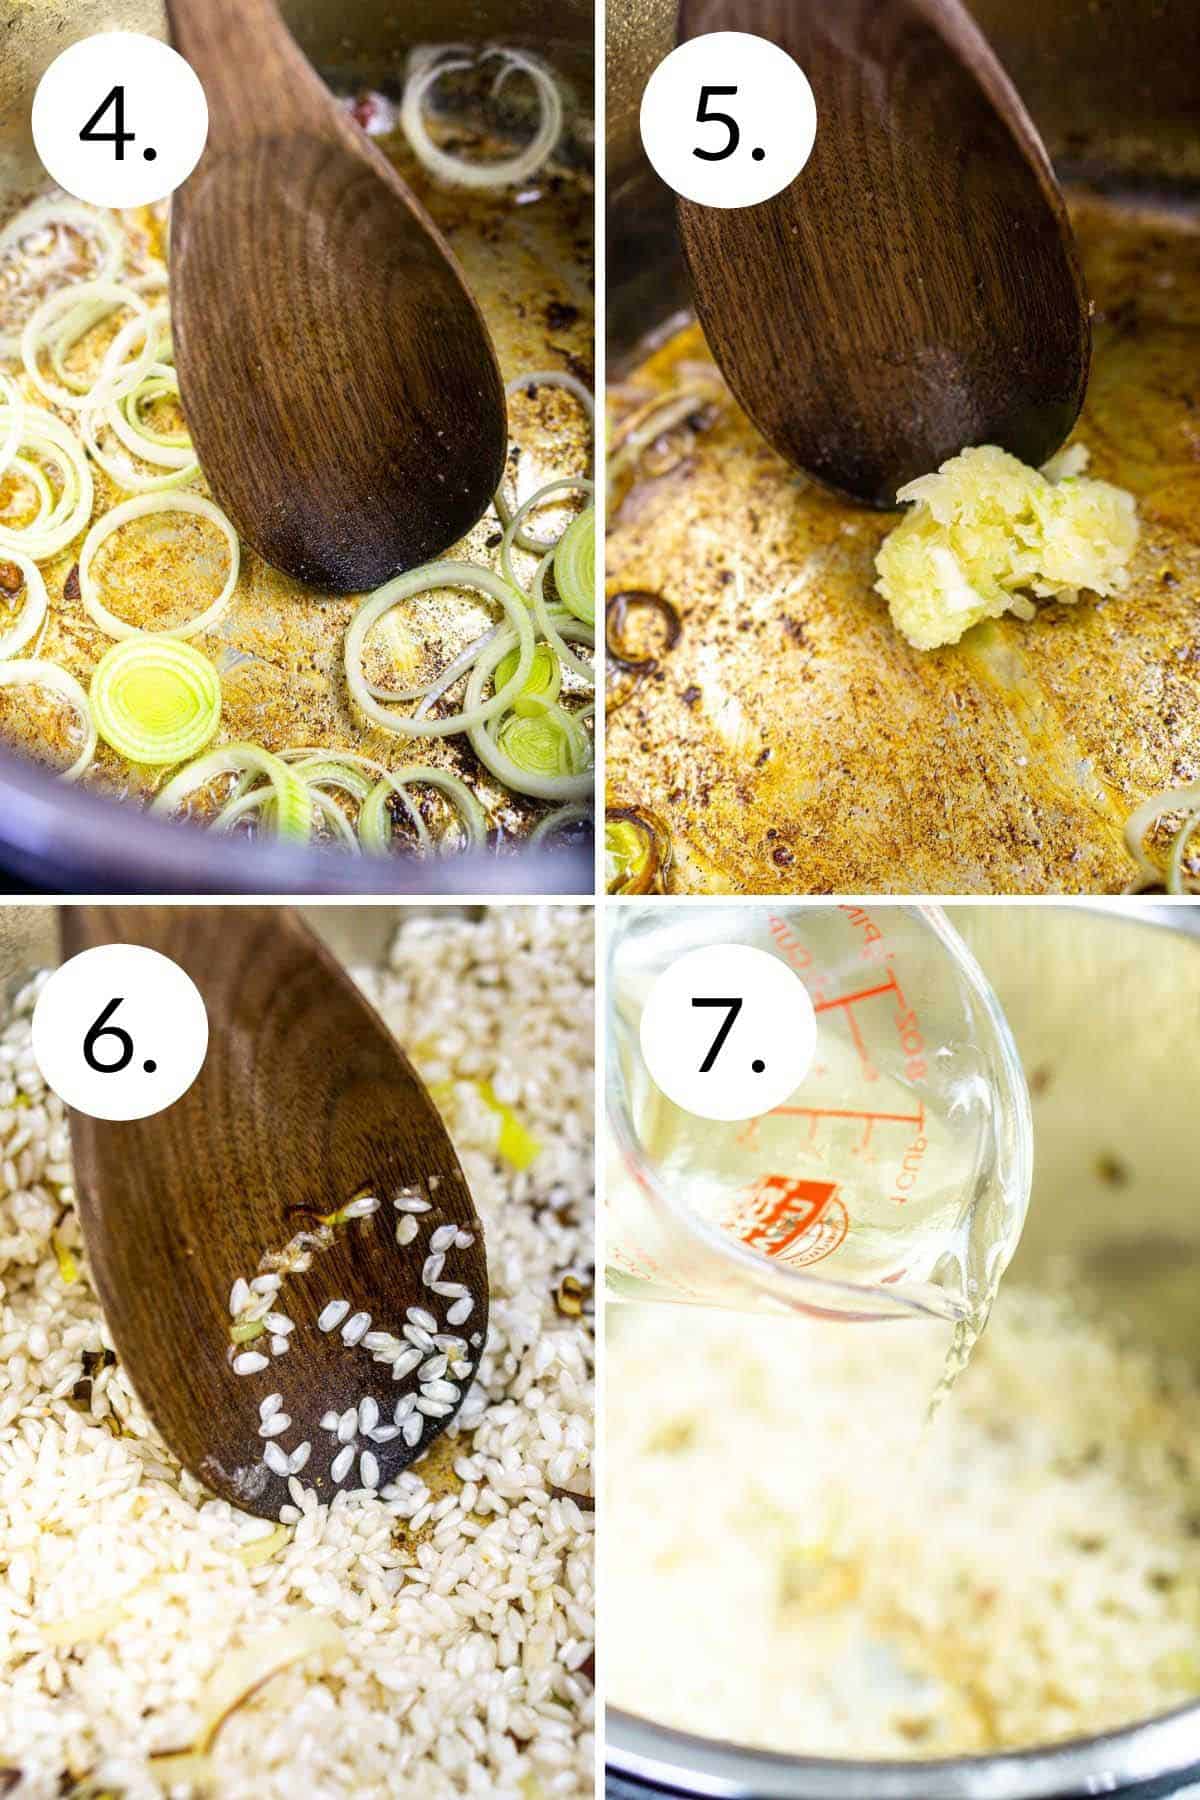 A collage showing the process of cooking the leeks, garlic, rice and adding the wine.